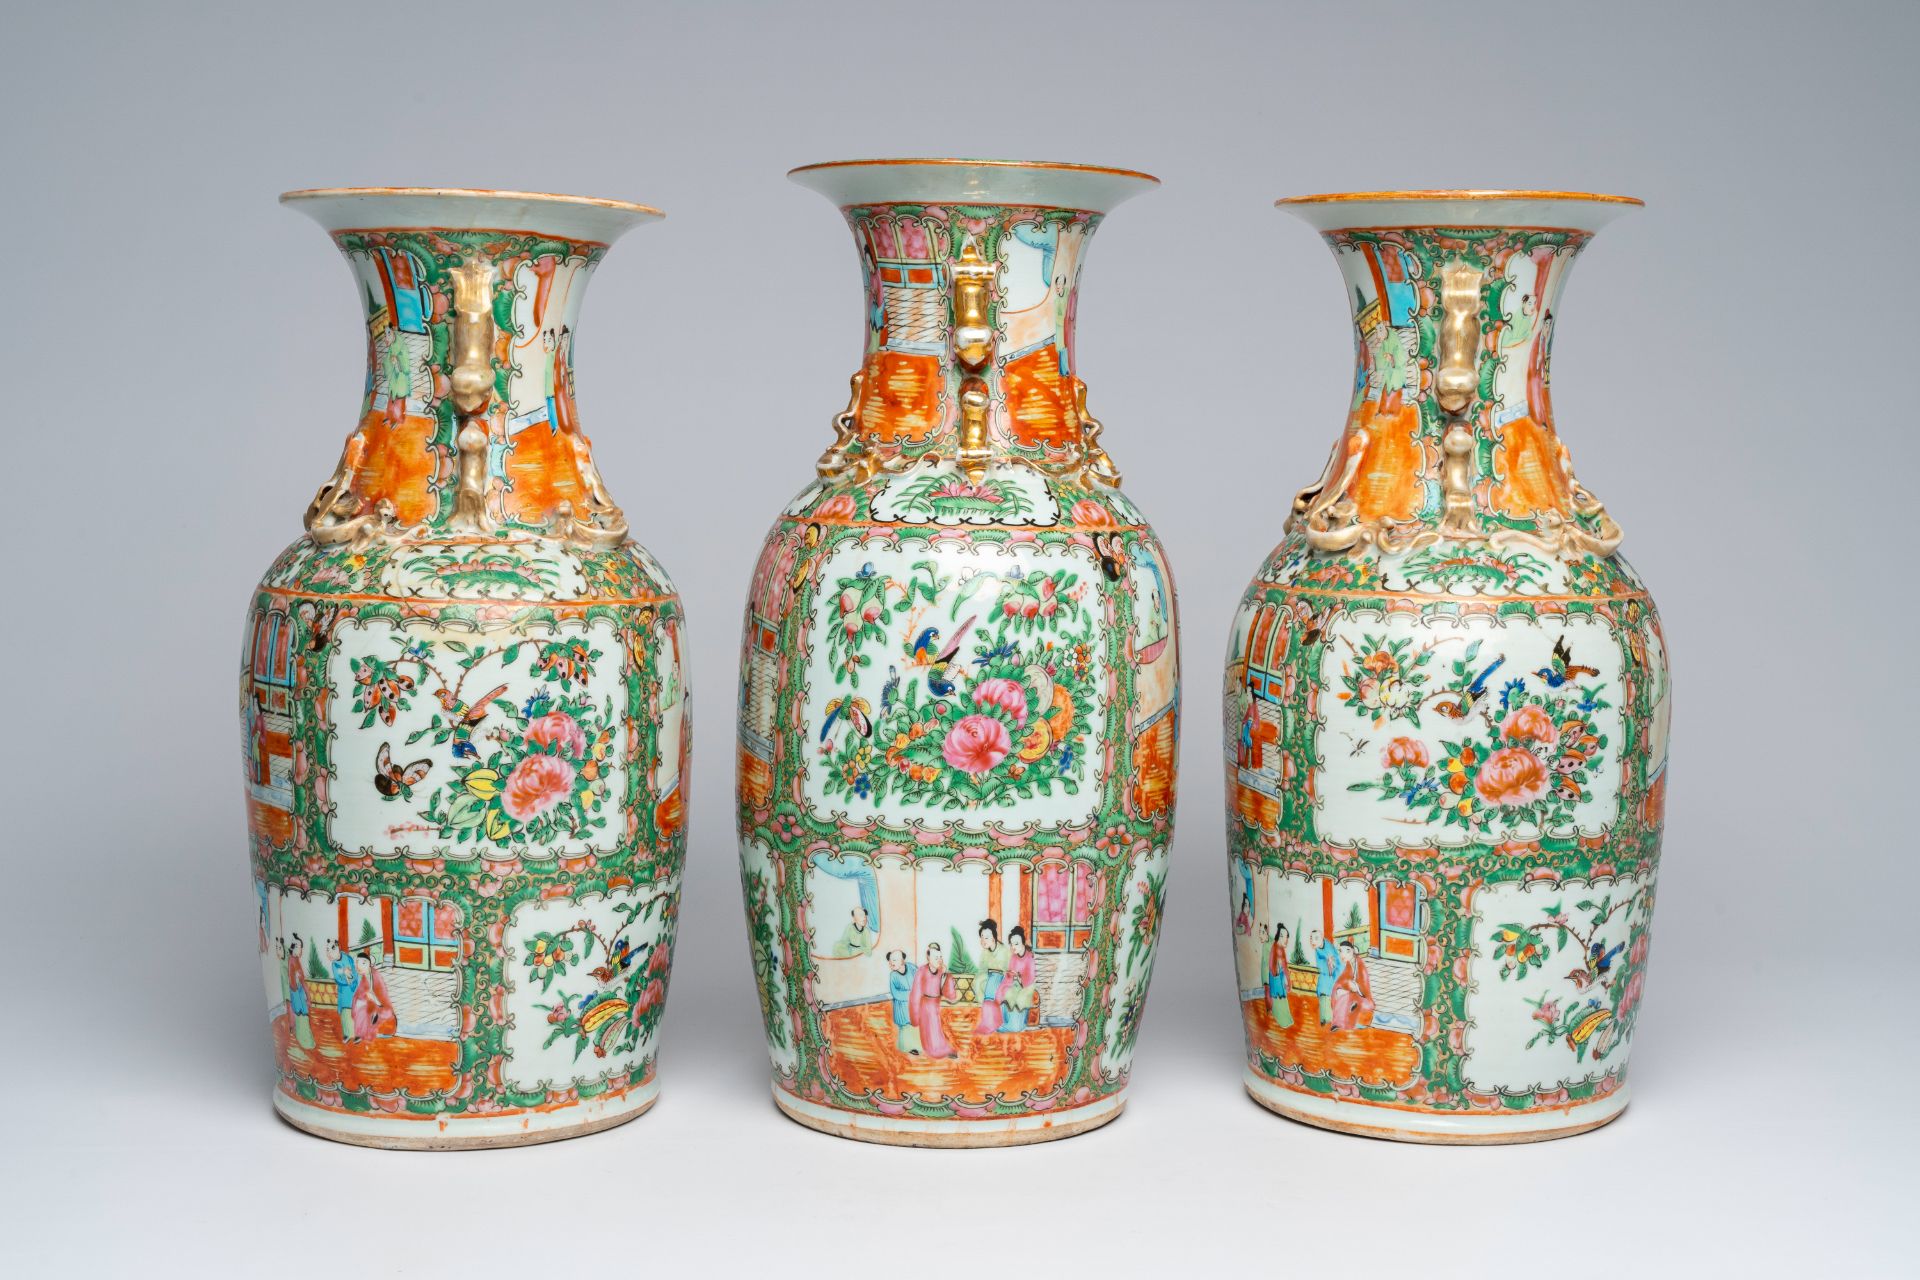 Three Chinese Canton famille rose vases with palace scenes and floral design, ca. 1900 - Image 4 of 6